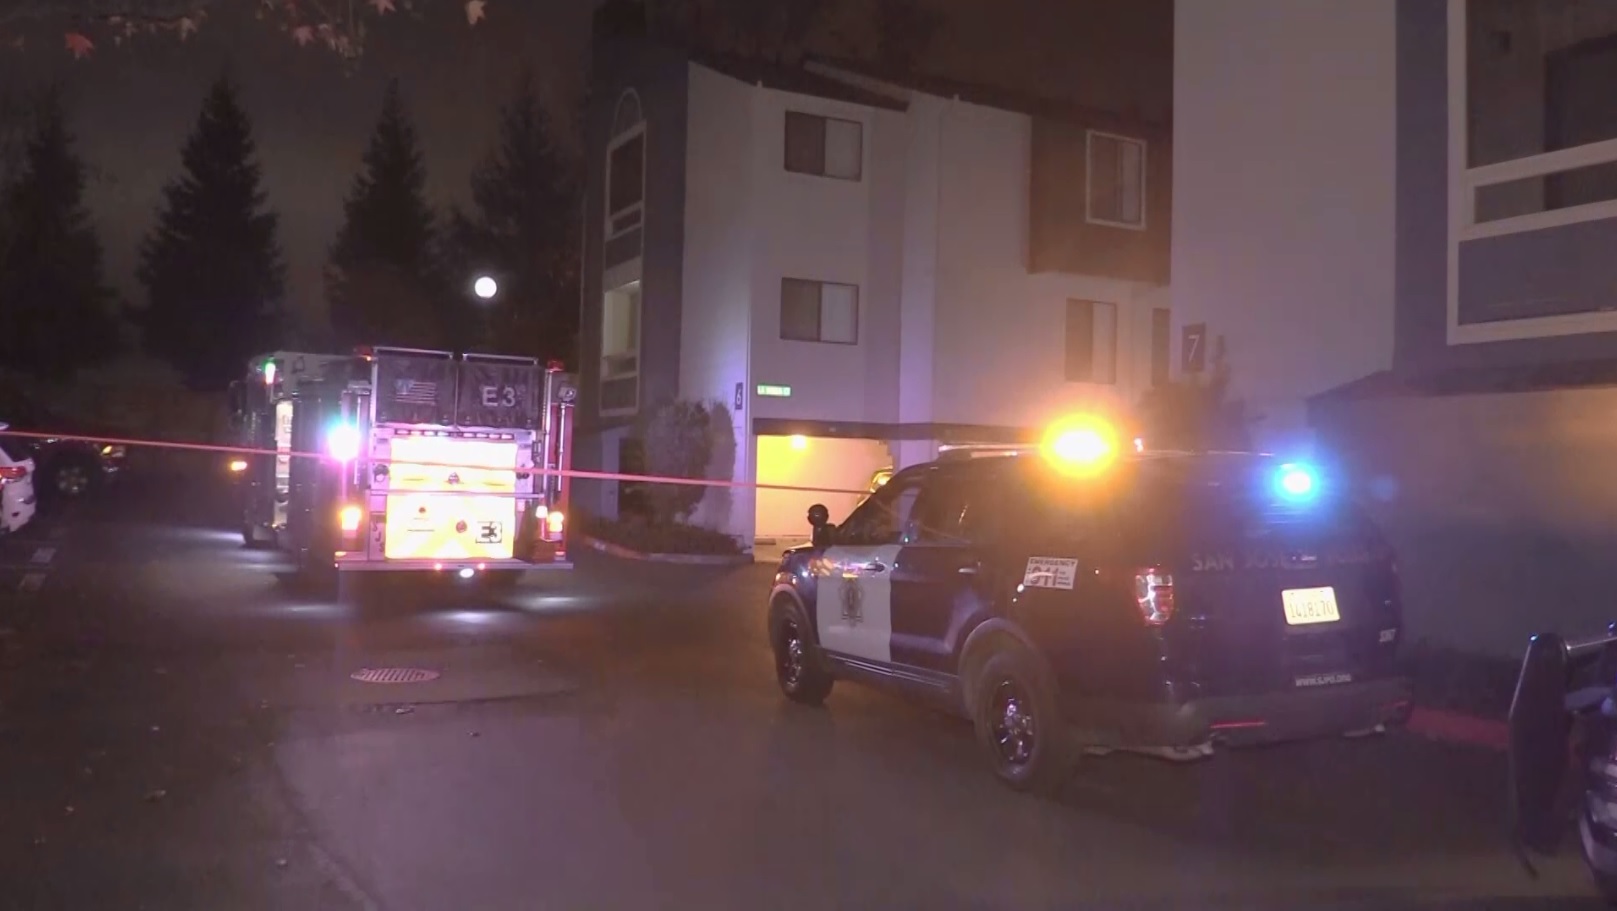 San Jose firefighters and police on the scene of a fire and possible explosion at the Alterra Apartments on January 1, 2020. (CBS)